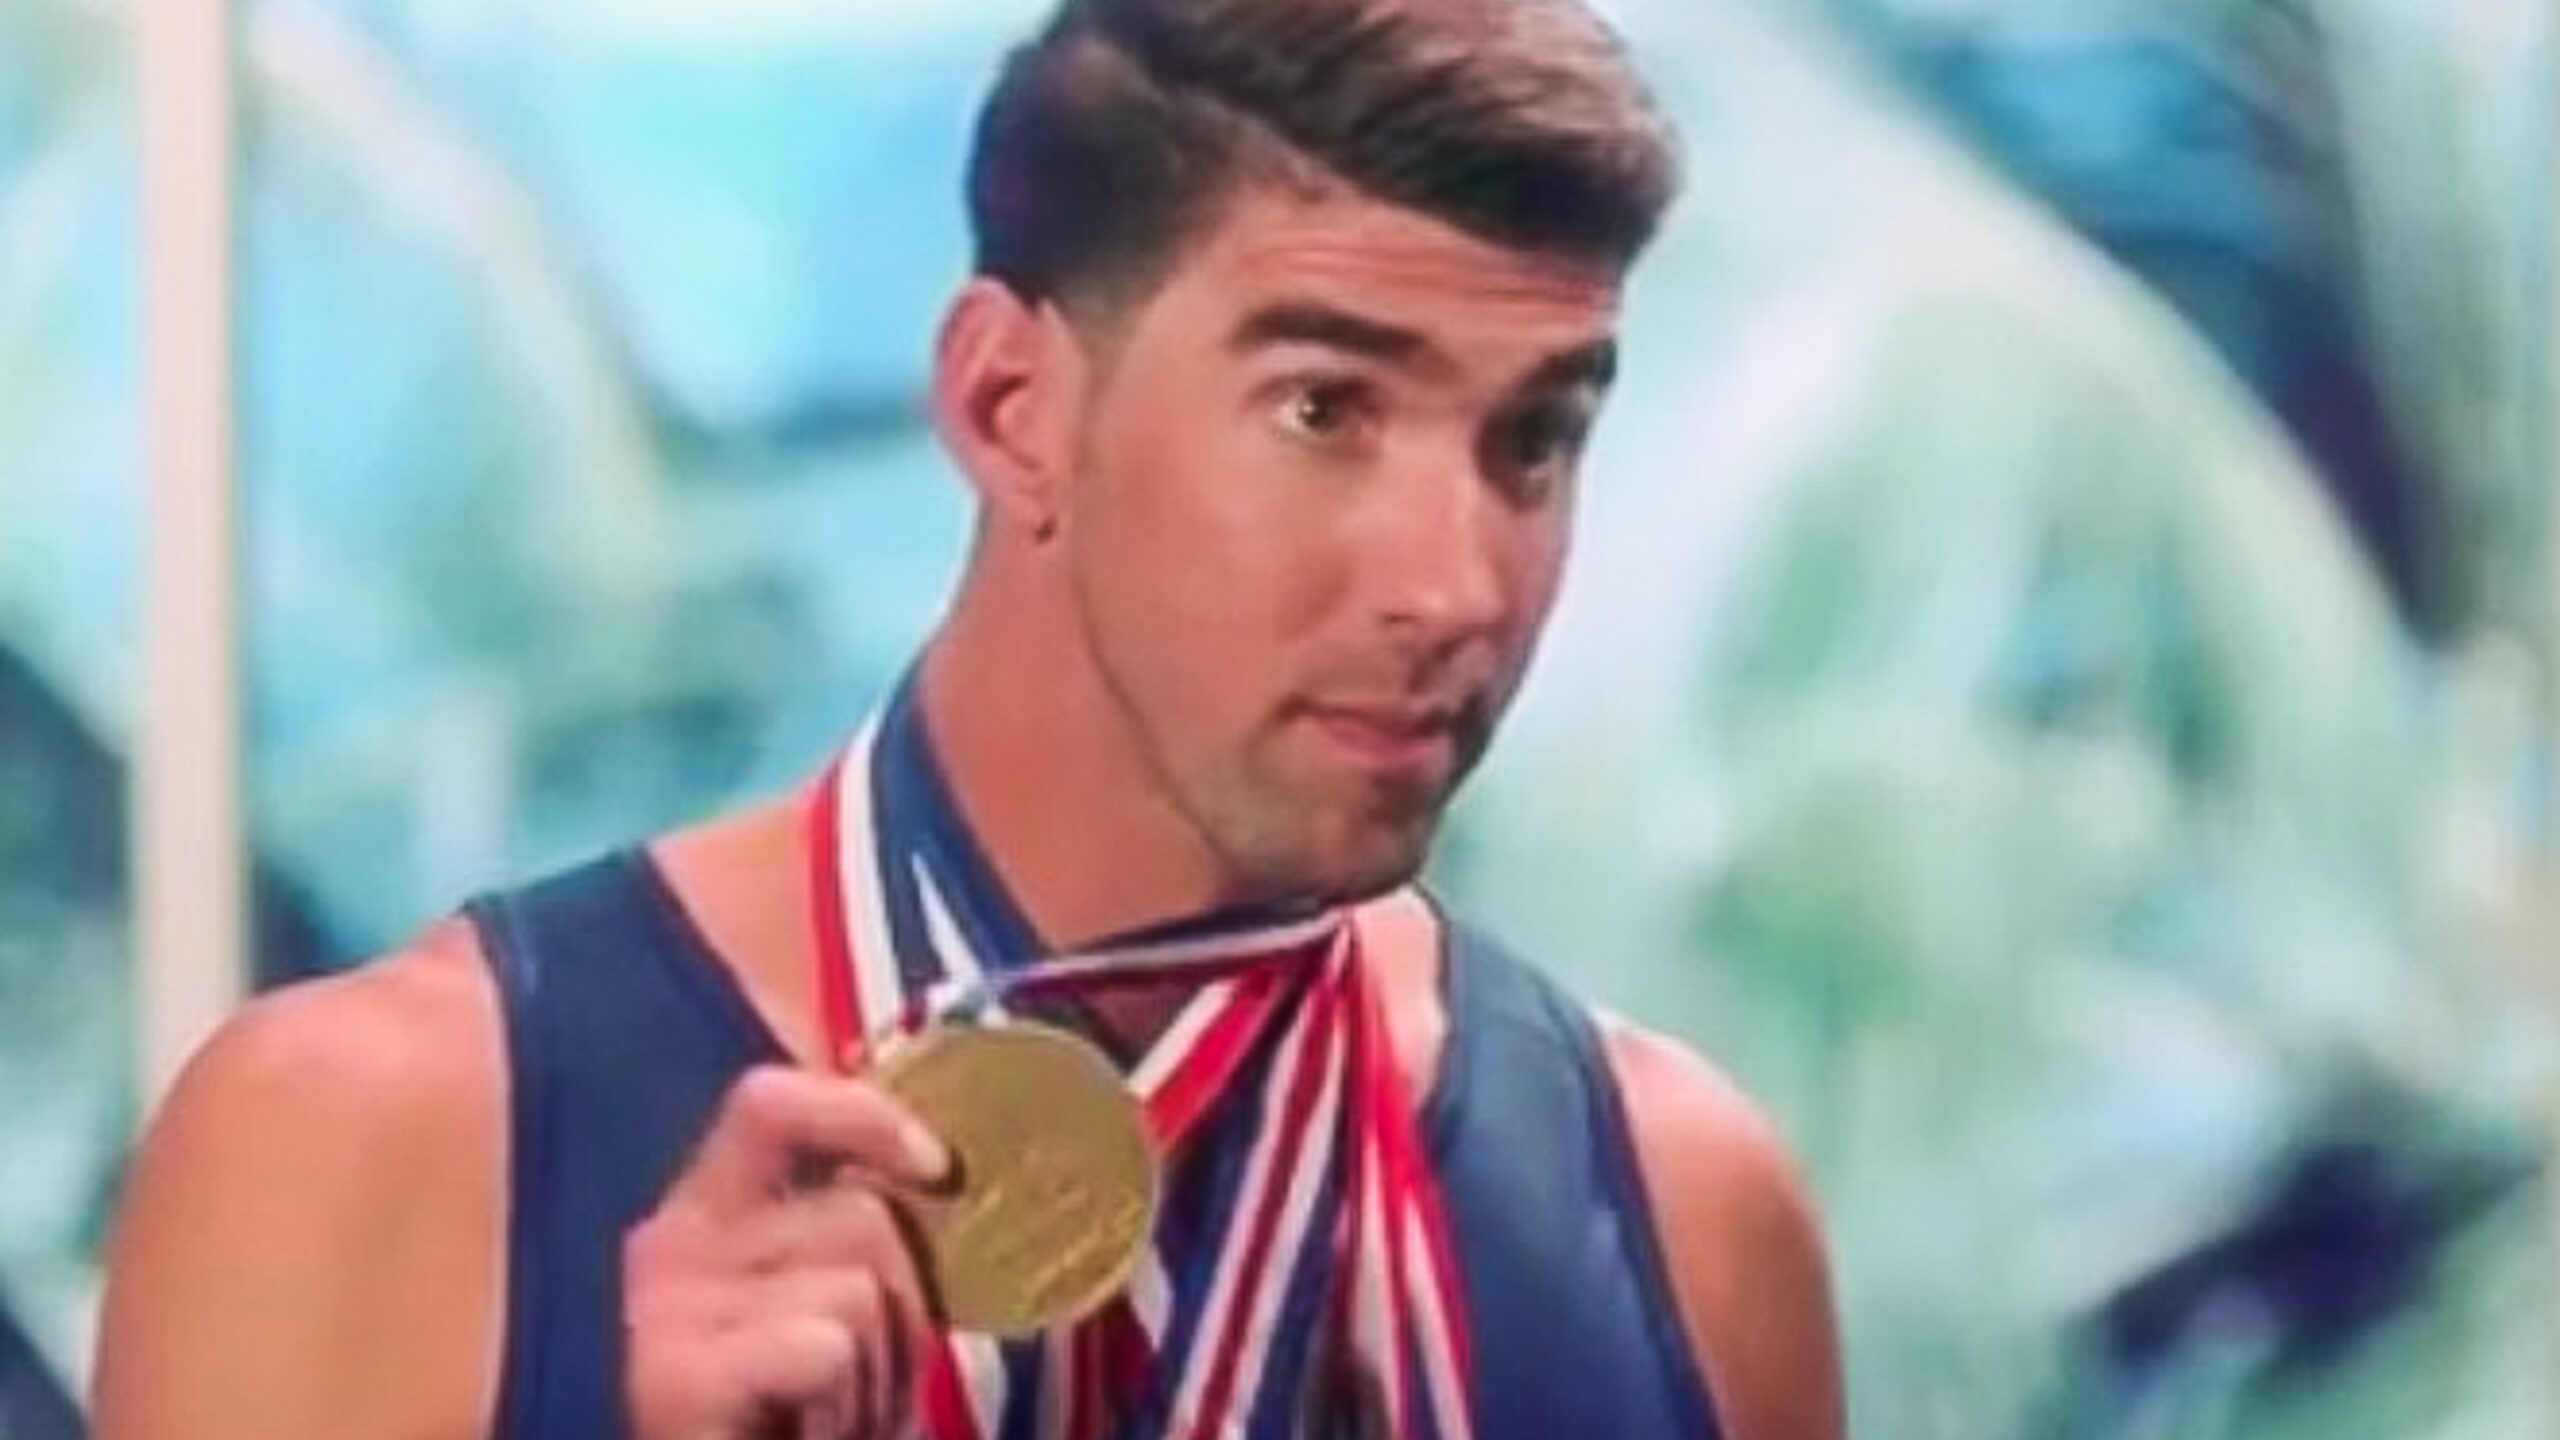 WATCH: Dwayne Johnson trains Michael Phelps for ‘Baywatch’ in new ad